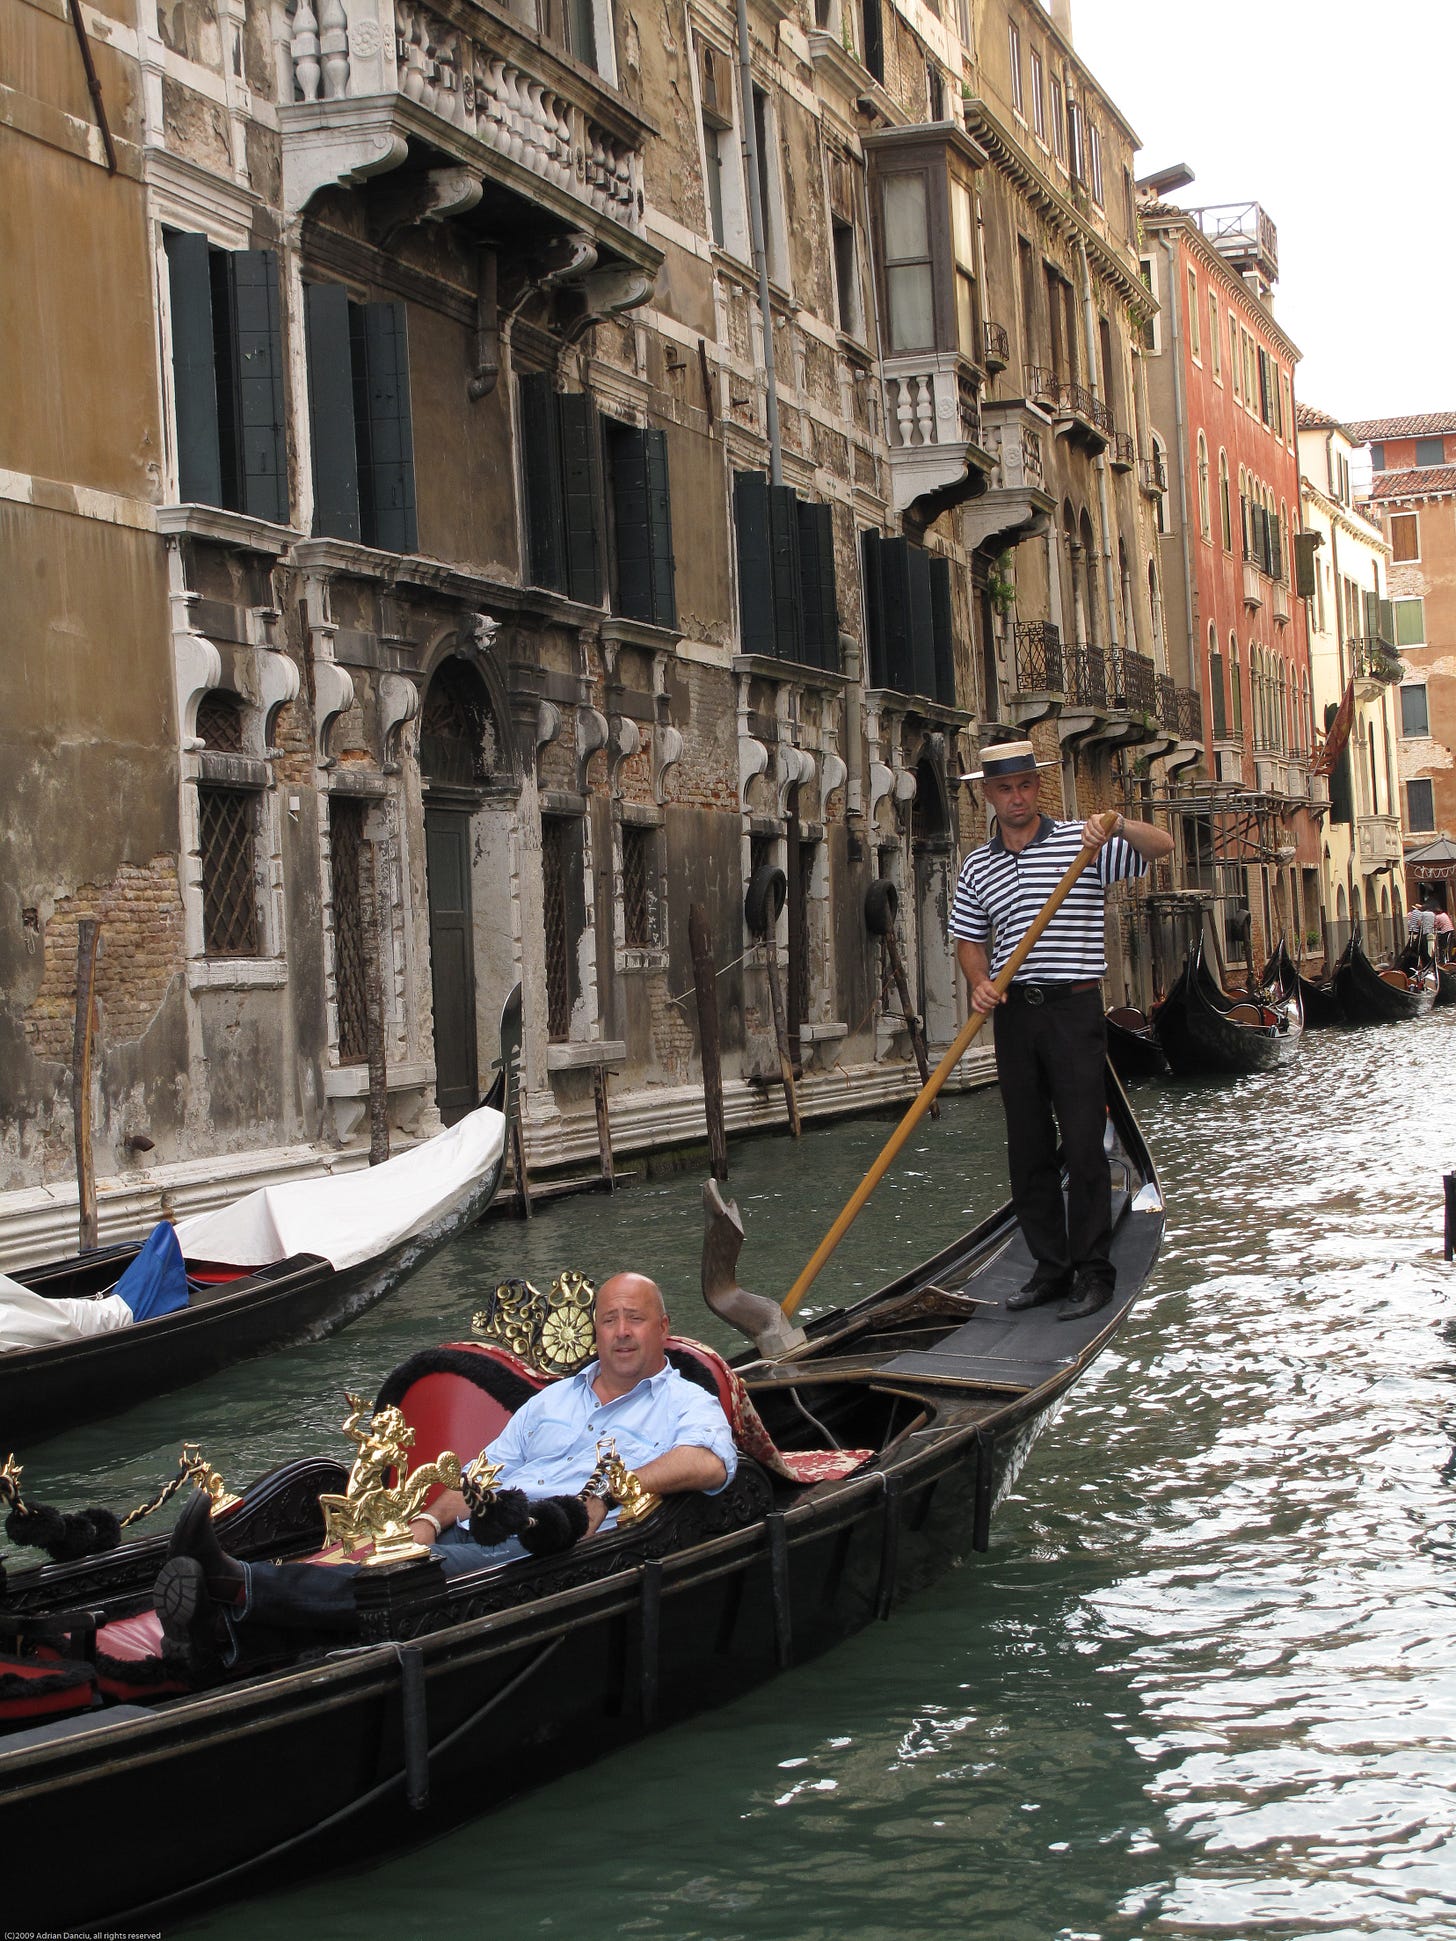 Andrew Zimmern visits Venice, Italy